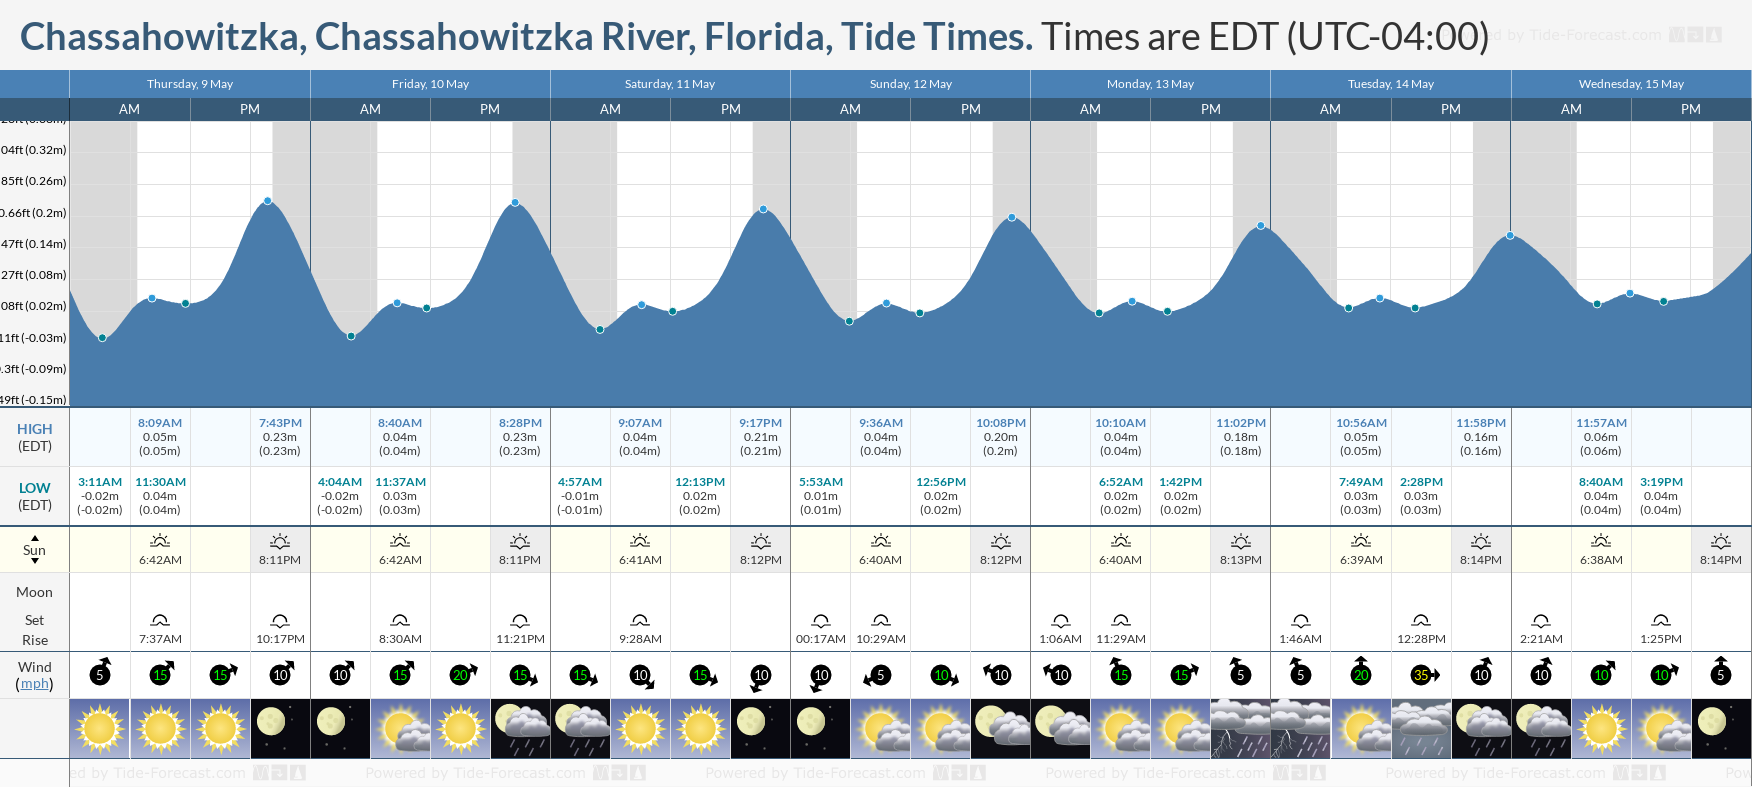 Chassahowitzka, Chassahowitzka River, Florida Tide Chart including high and low tide tide times for the next 7 days